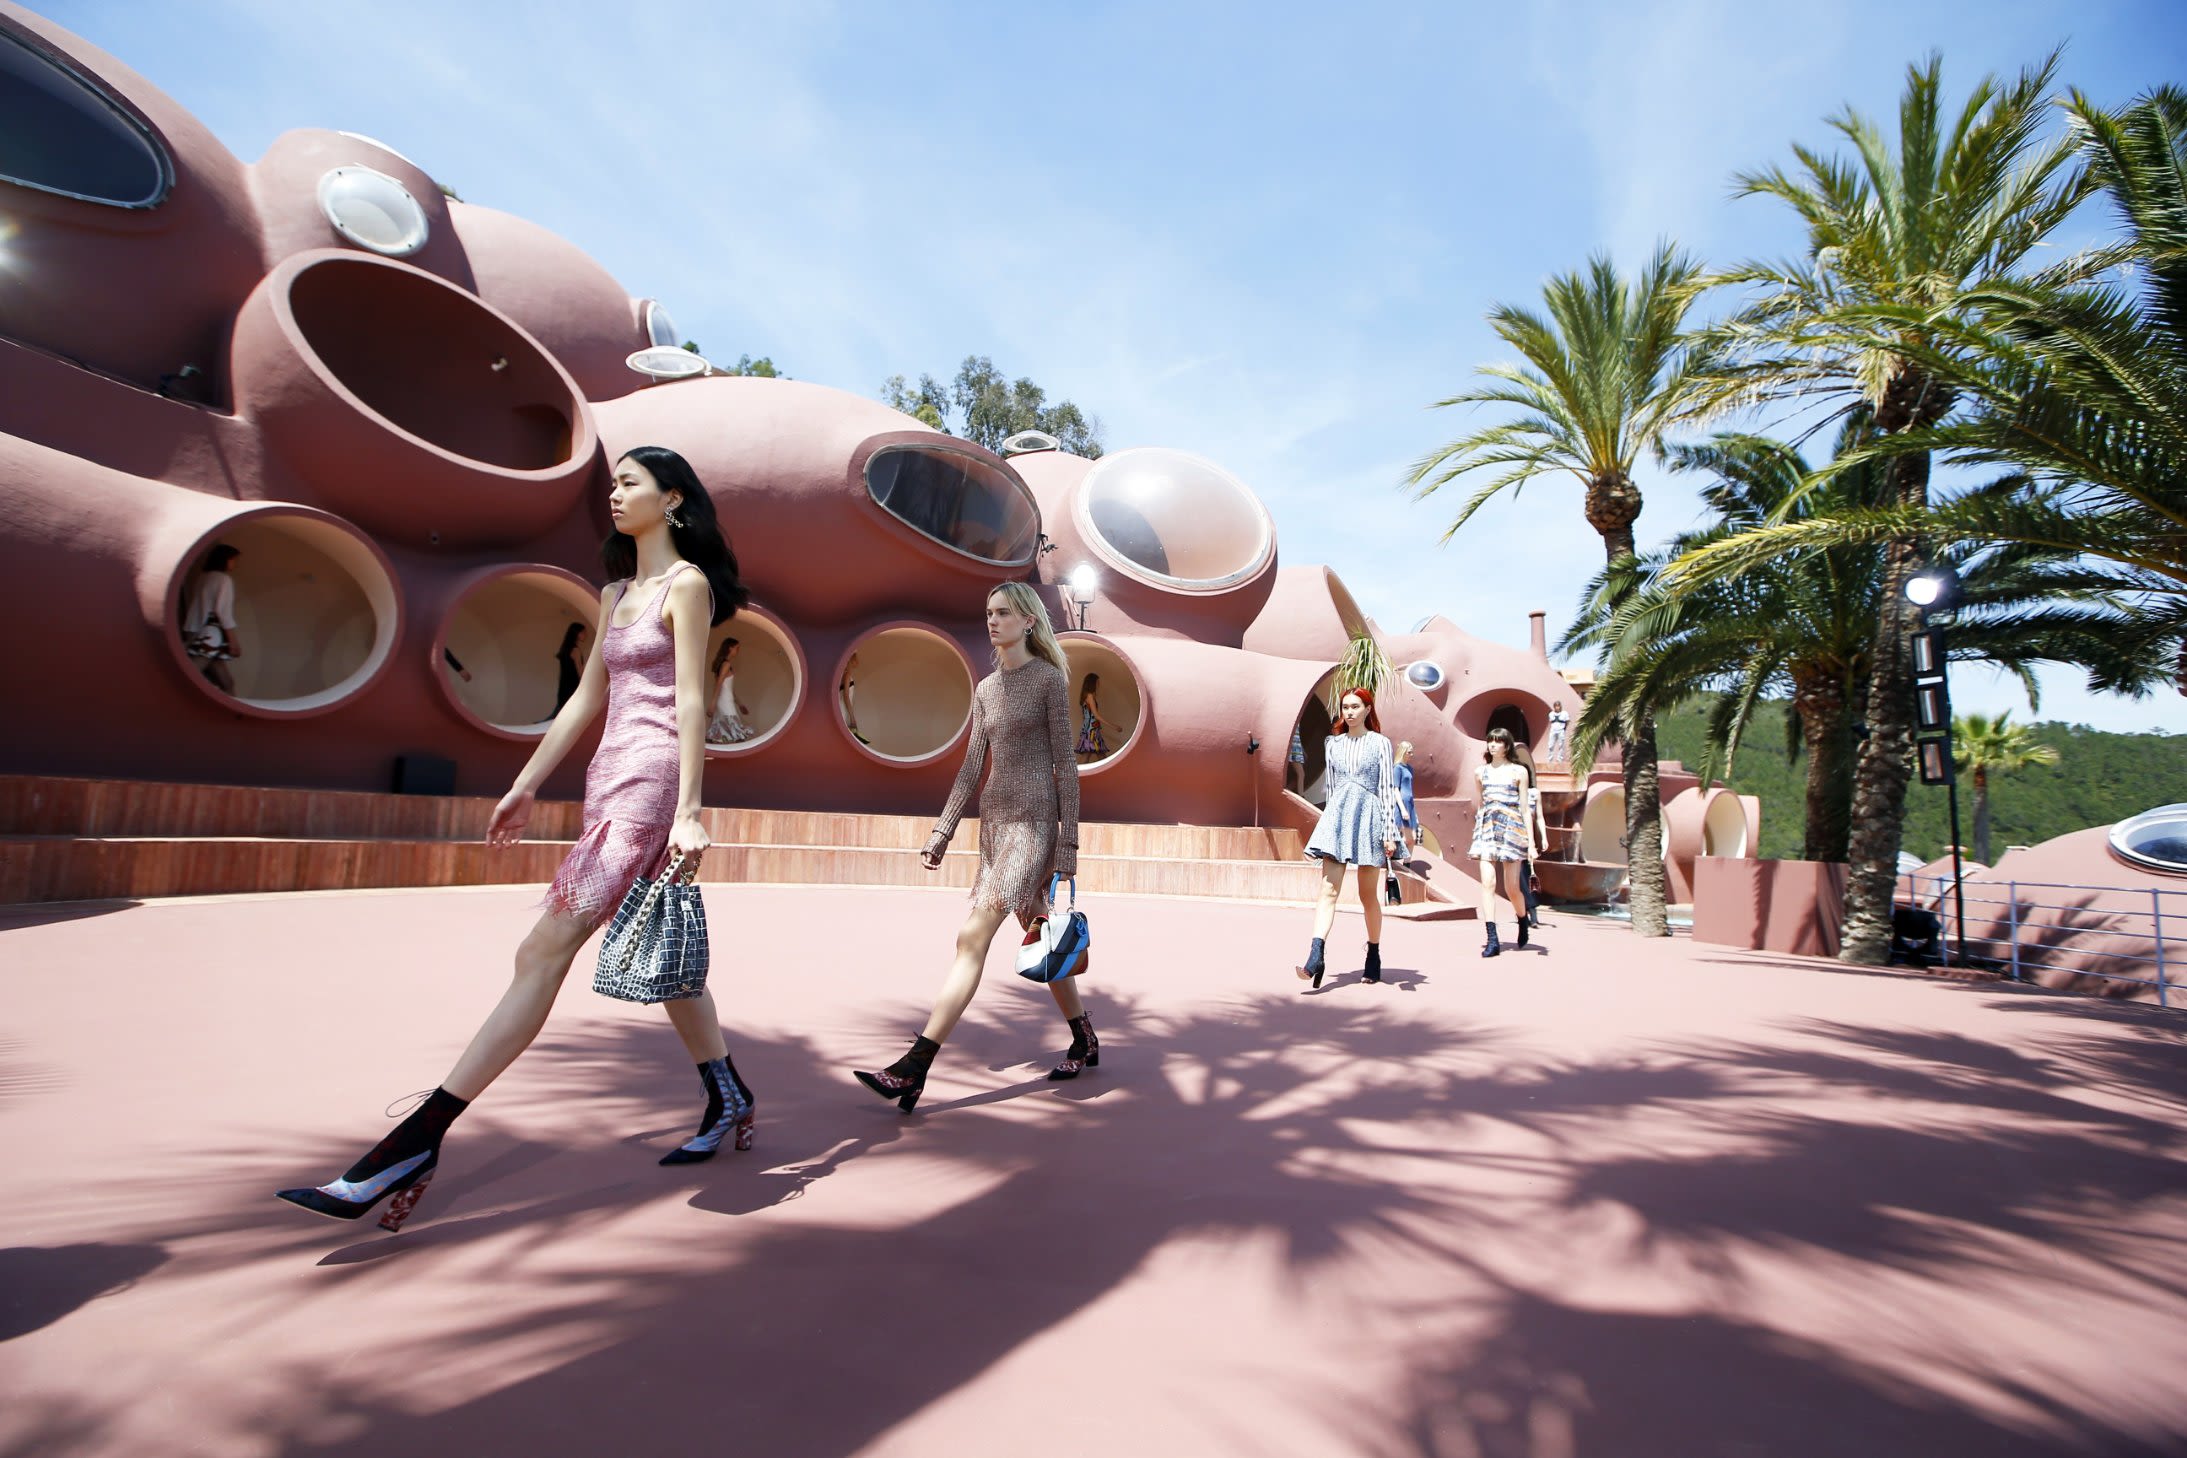 Louis Vuitton unveils its Cruise 2016 collection at iconic Bob